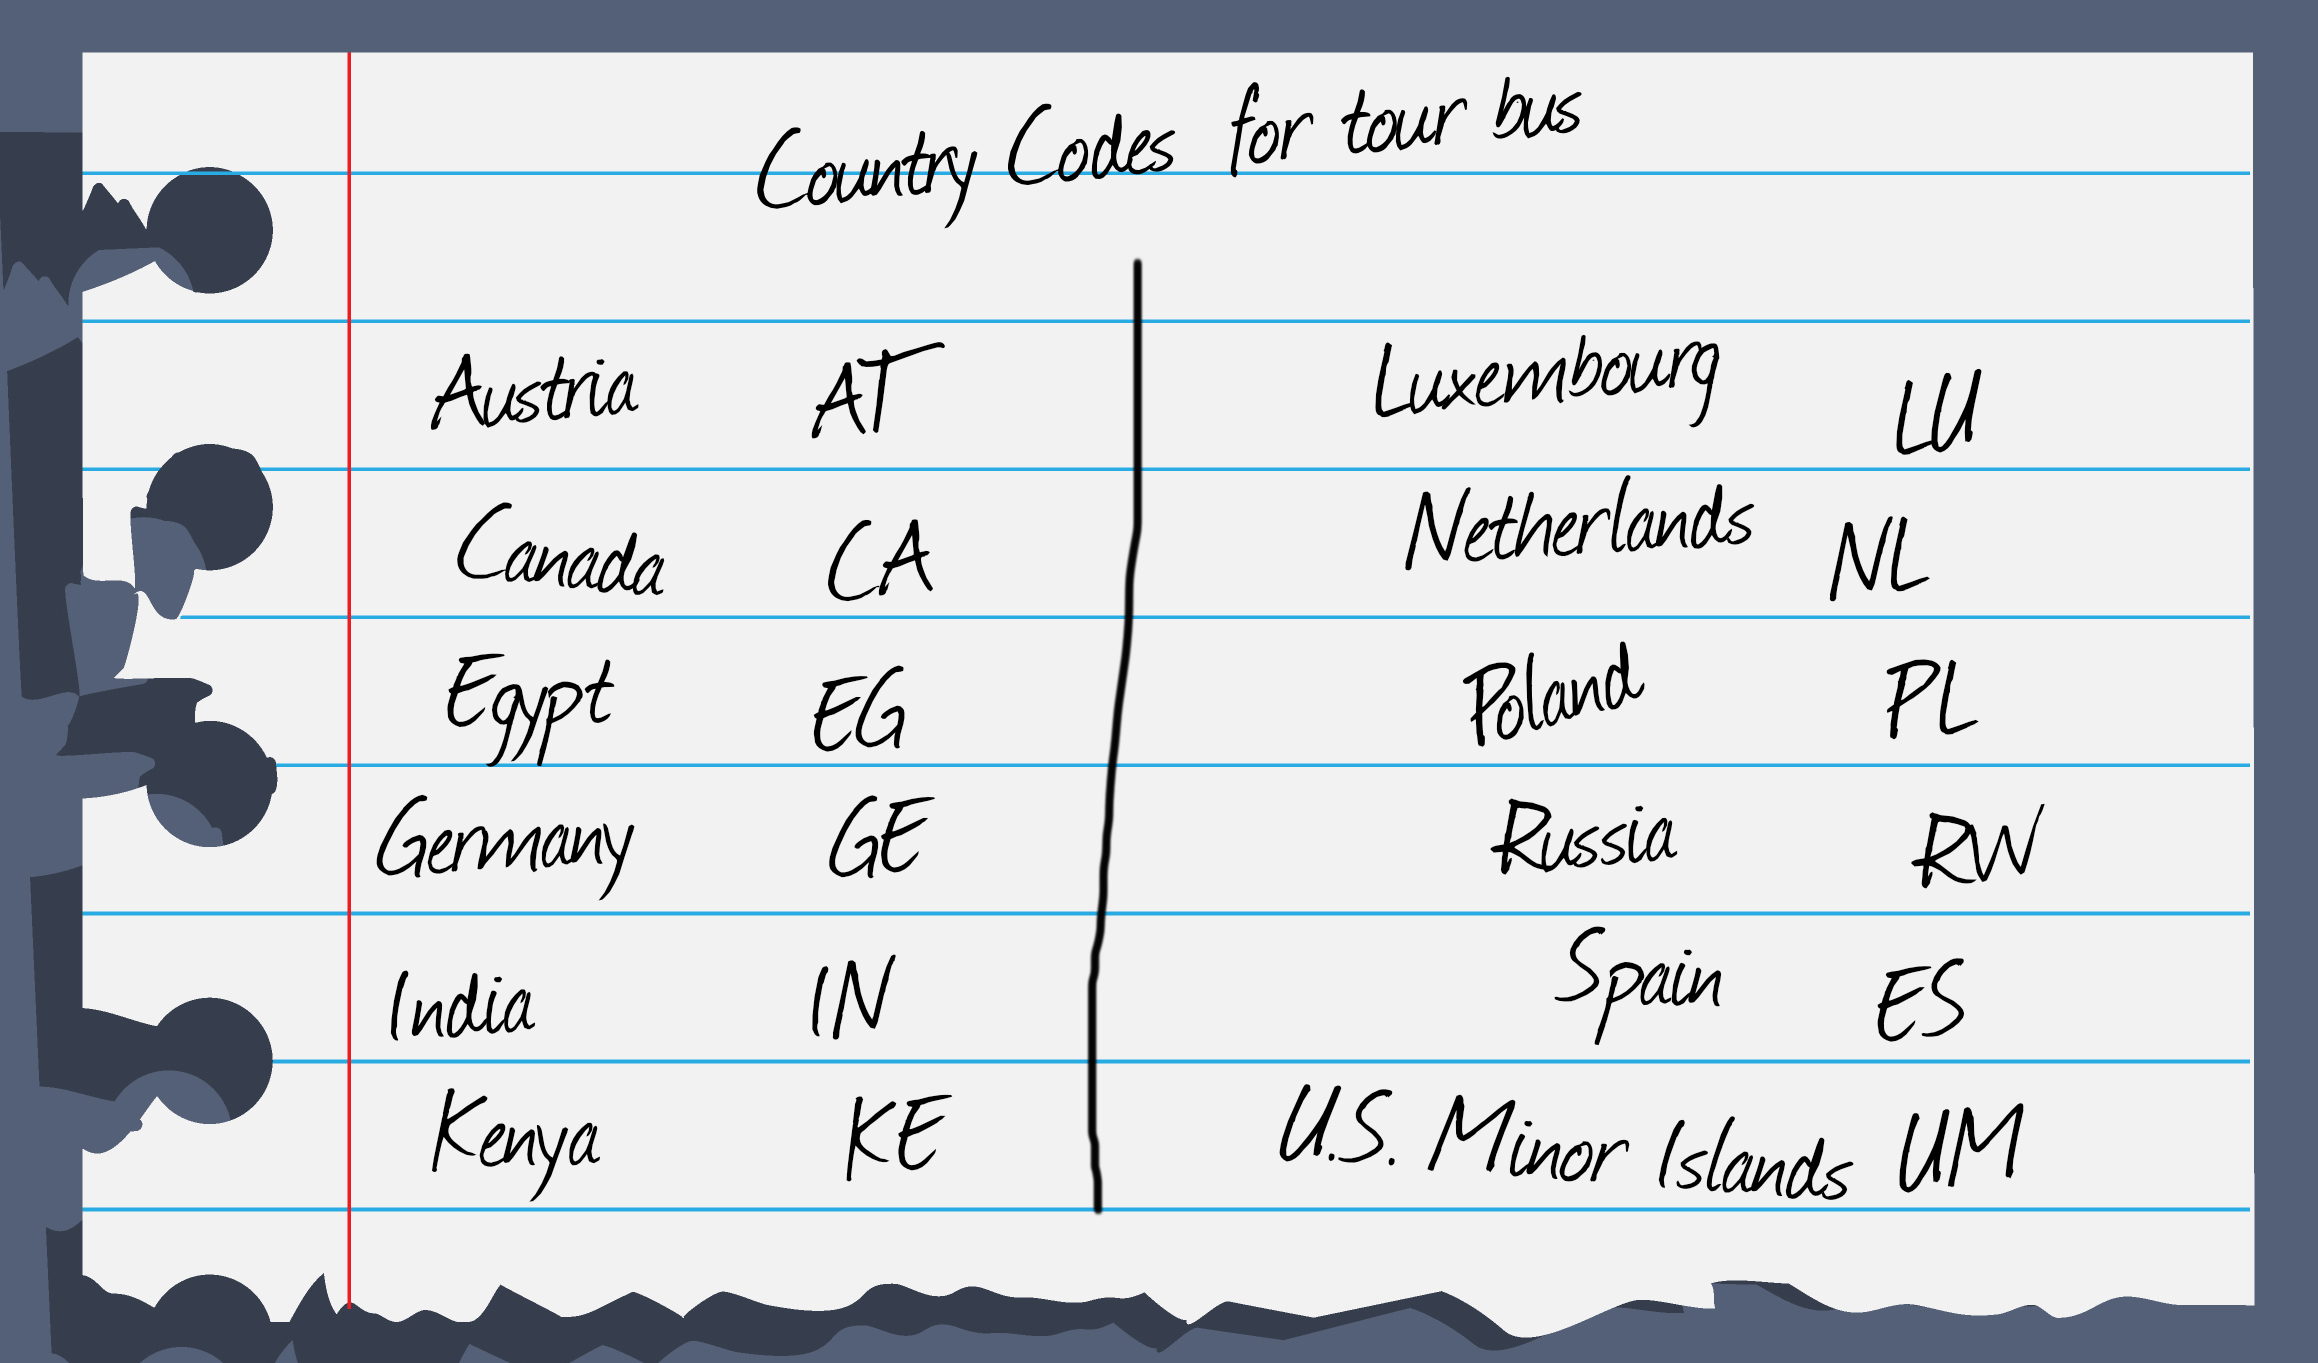 country-codes-tour-bus.png